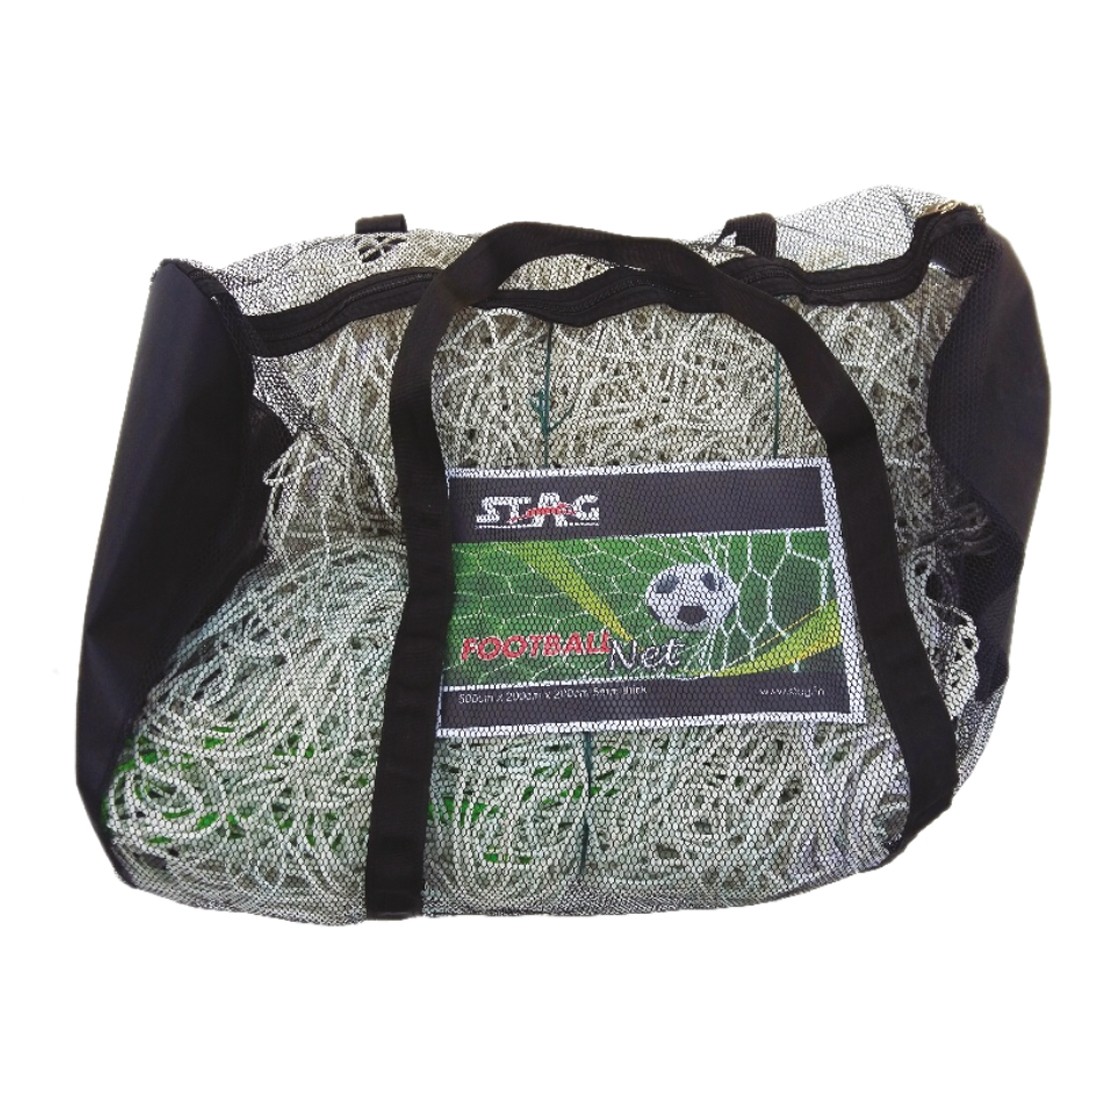 FOOTBALL NET SPECIAL WITH P.P. BRAIDED U.V. COATED THREAD 4MM